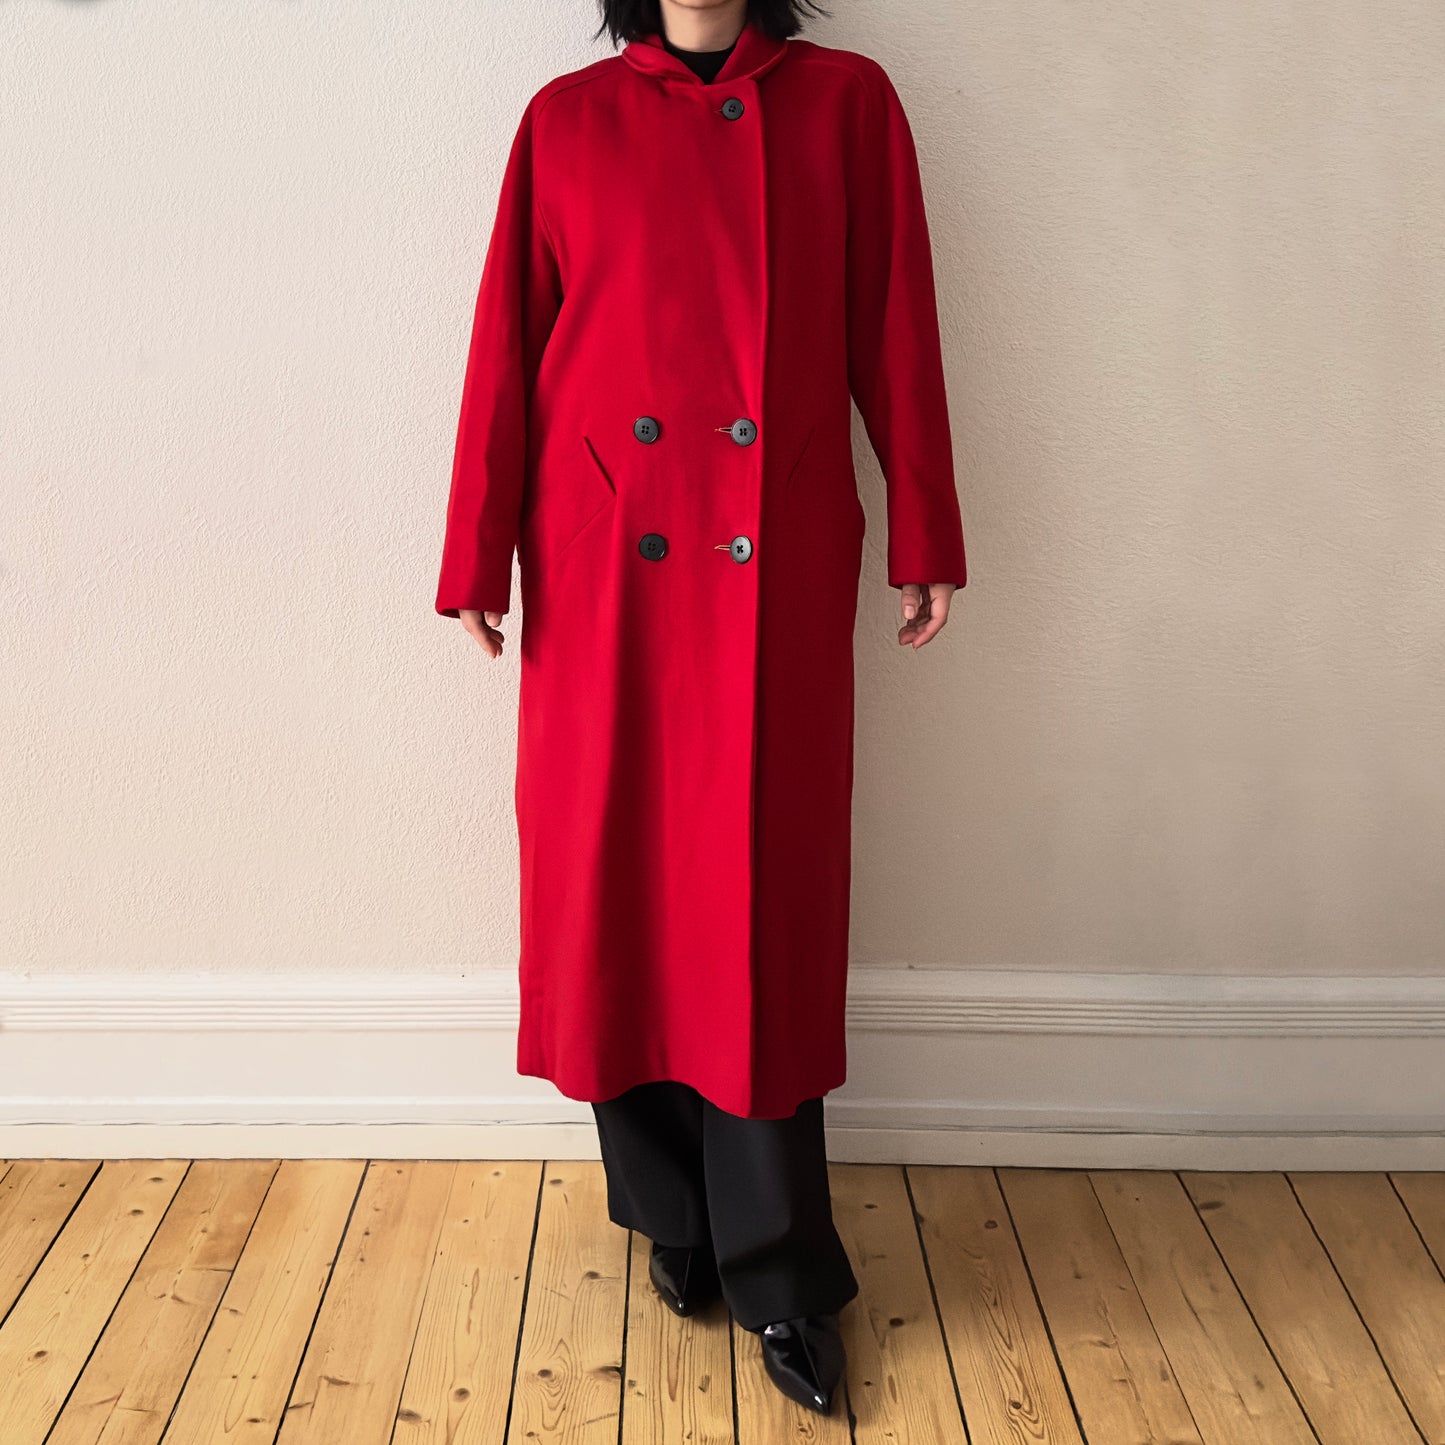 Vintage Red Wool Coat Pleated Detail- size M